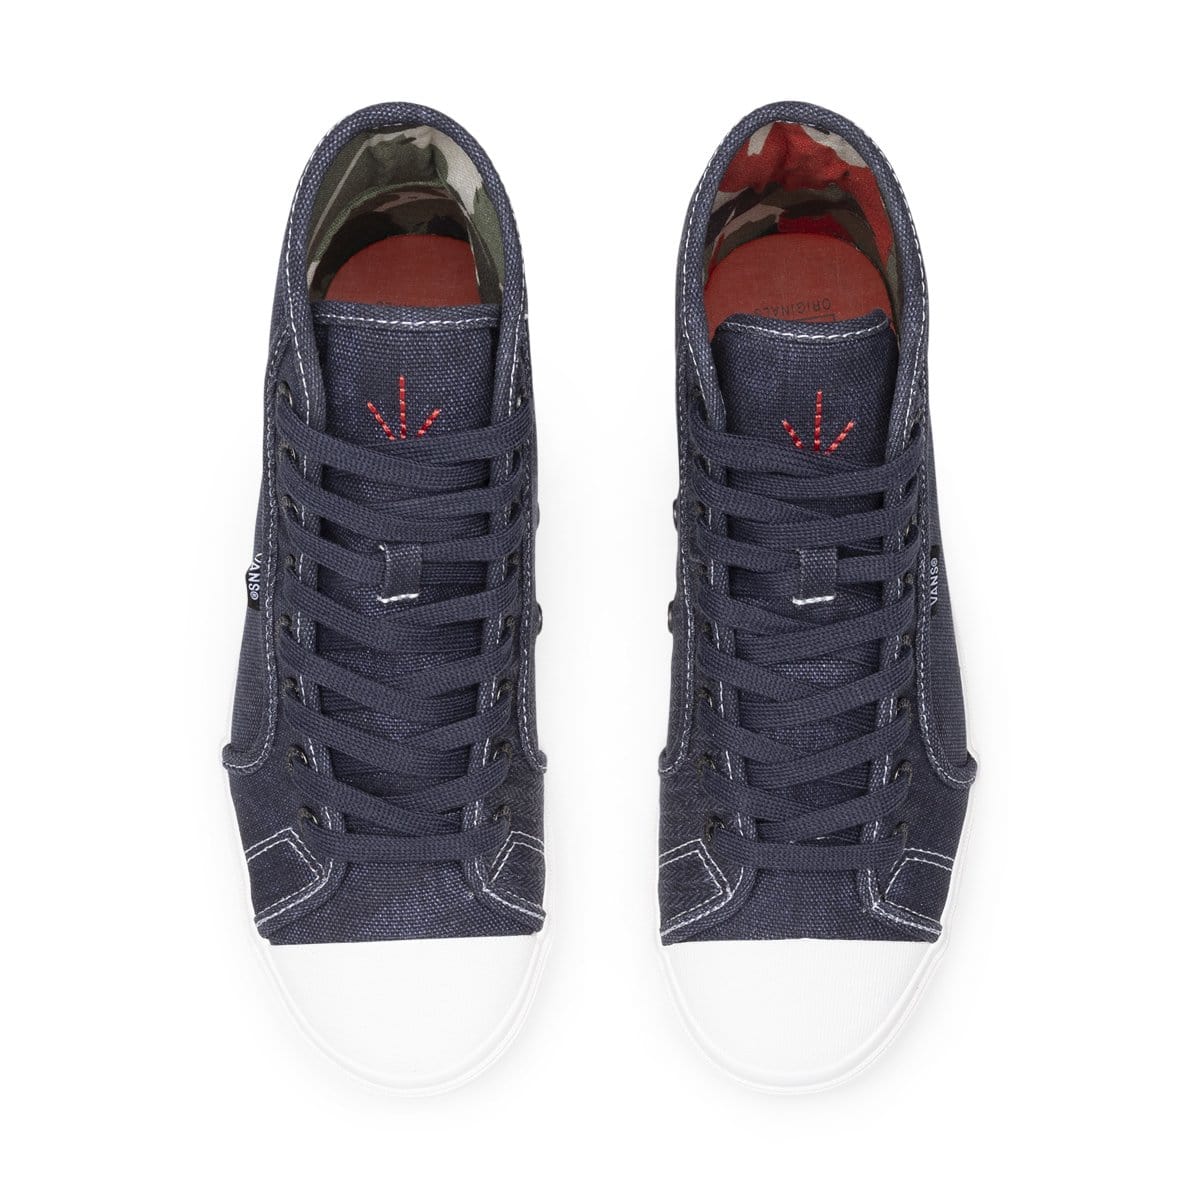 Vault by Vans Casual x Nigel Cabourn OG STYLE 24 LX